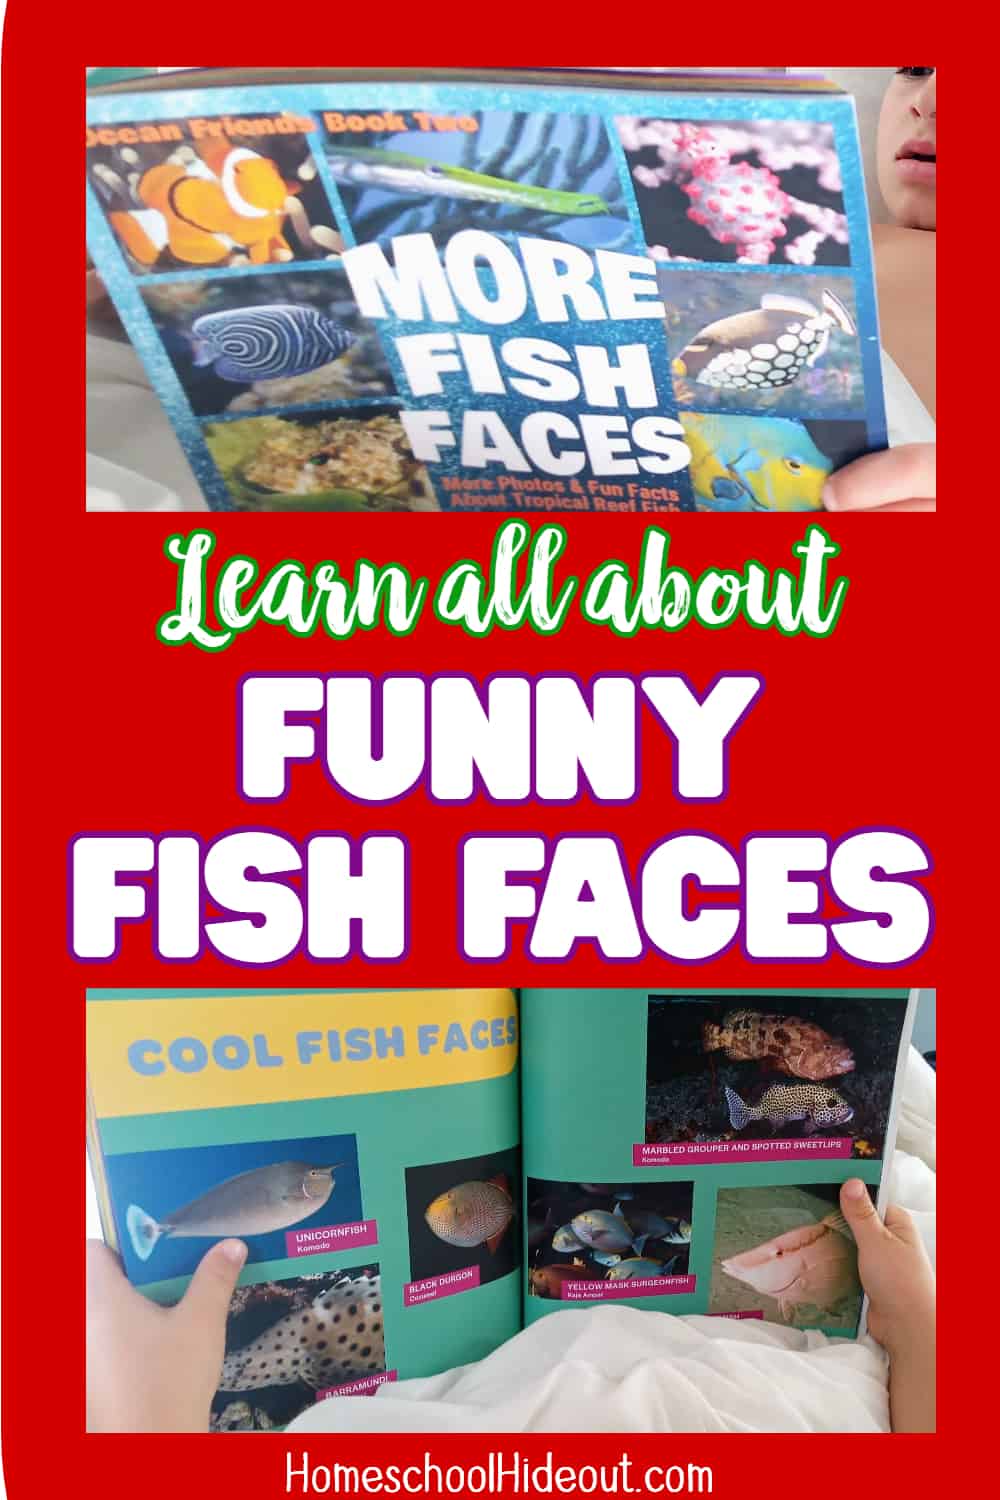 This educational ocean life book really brings the sea to life for kids! I love seeing the different (funny!) faces of fish. It's feels like you are right there next to them! We love page #44.